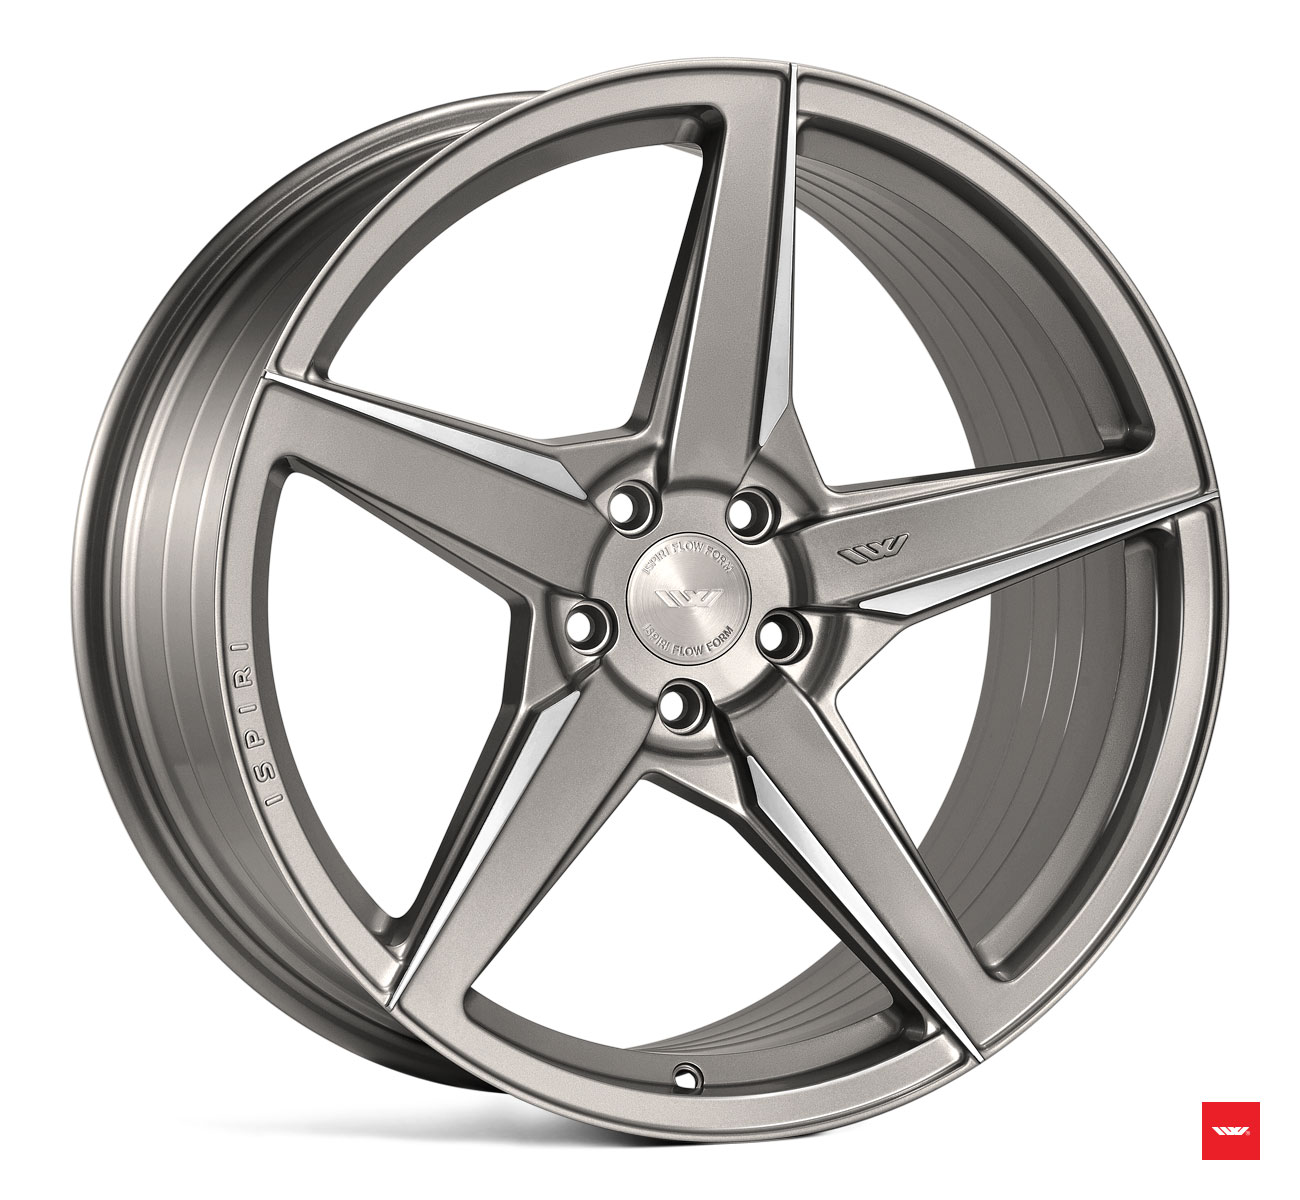 NEW 20  ISPIRI FFR5 5 SPOKE ALLOY WHEELS IN CARBON GREY BRUSHED  VARIOUS FITMENTS AVAILABLE